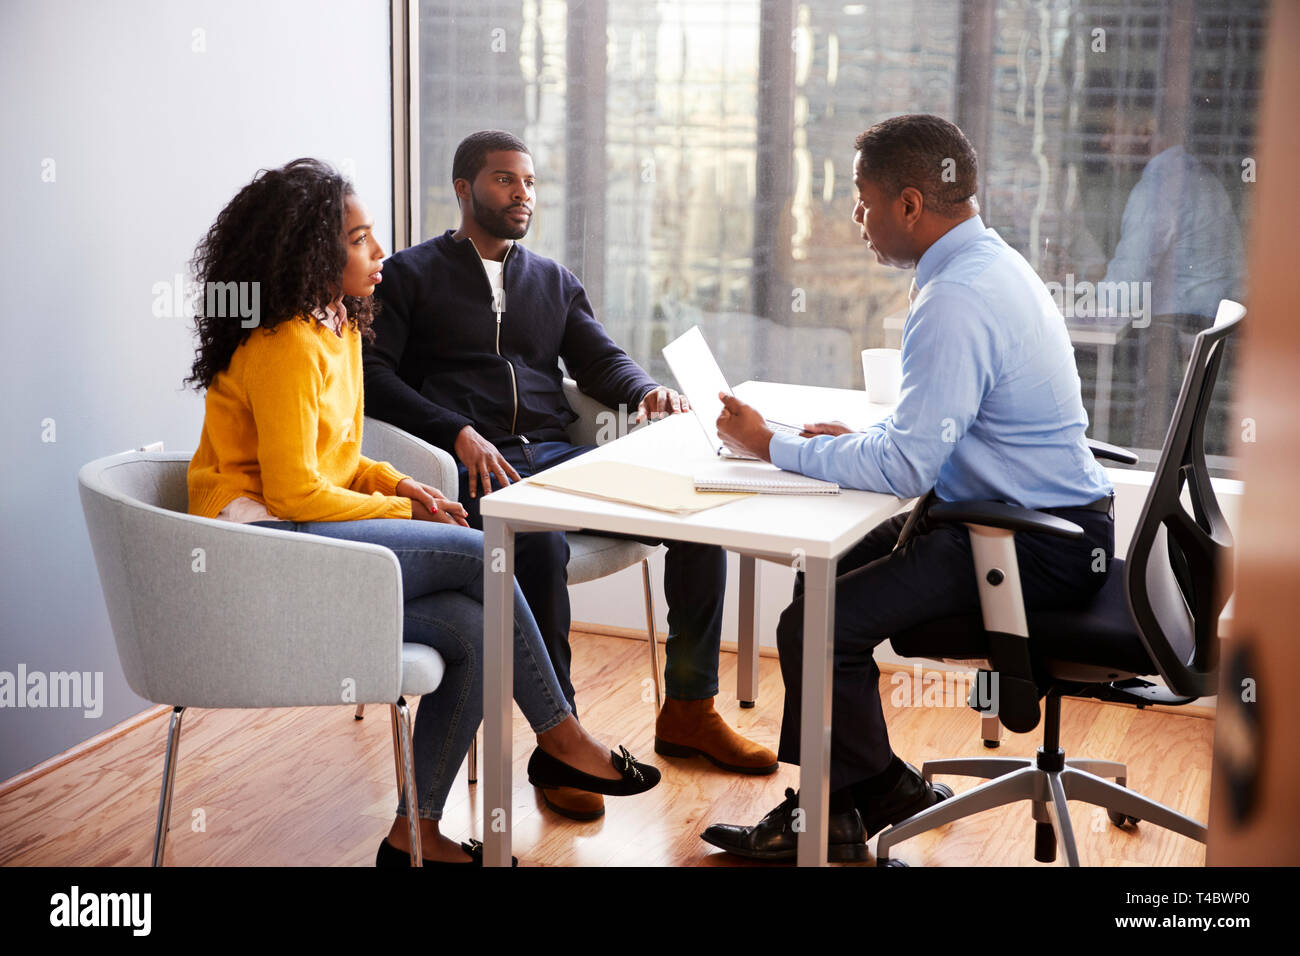 Couple Meeting With Male Financial Advisor Relationship Counsellor In Office Stock Photo